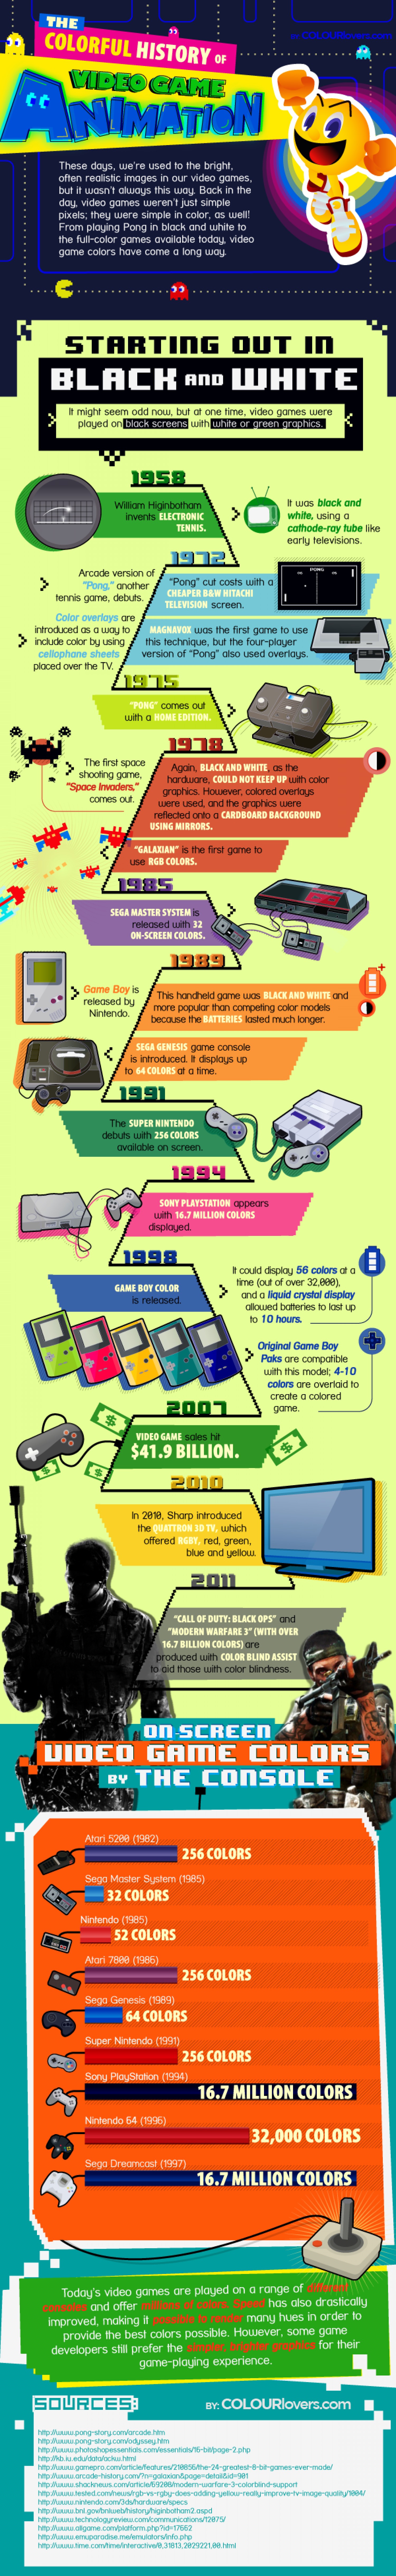 the history of video games